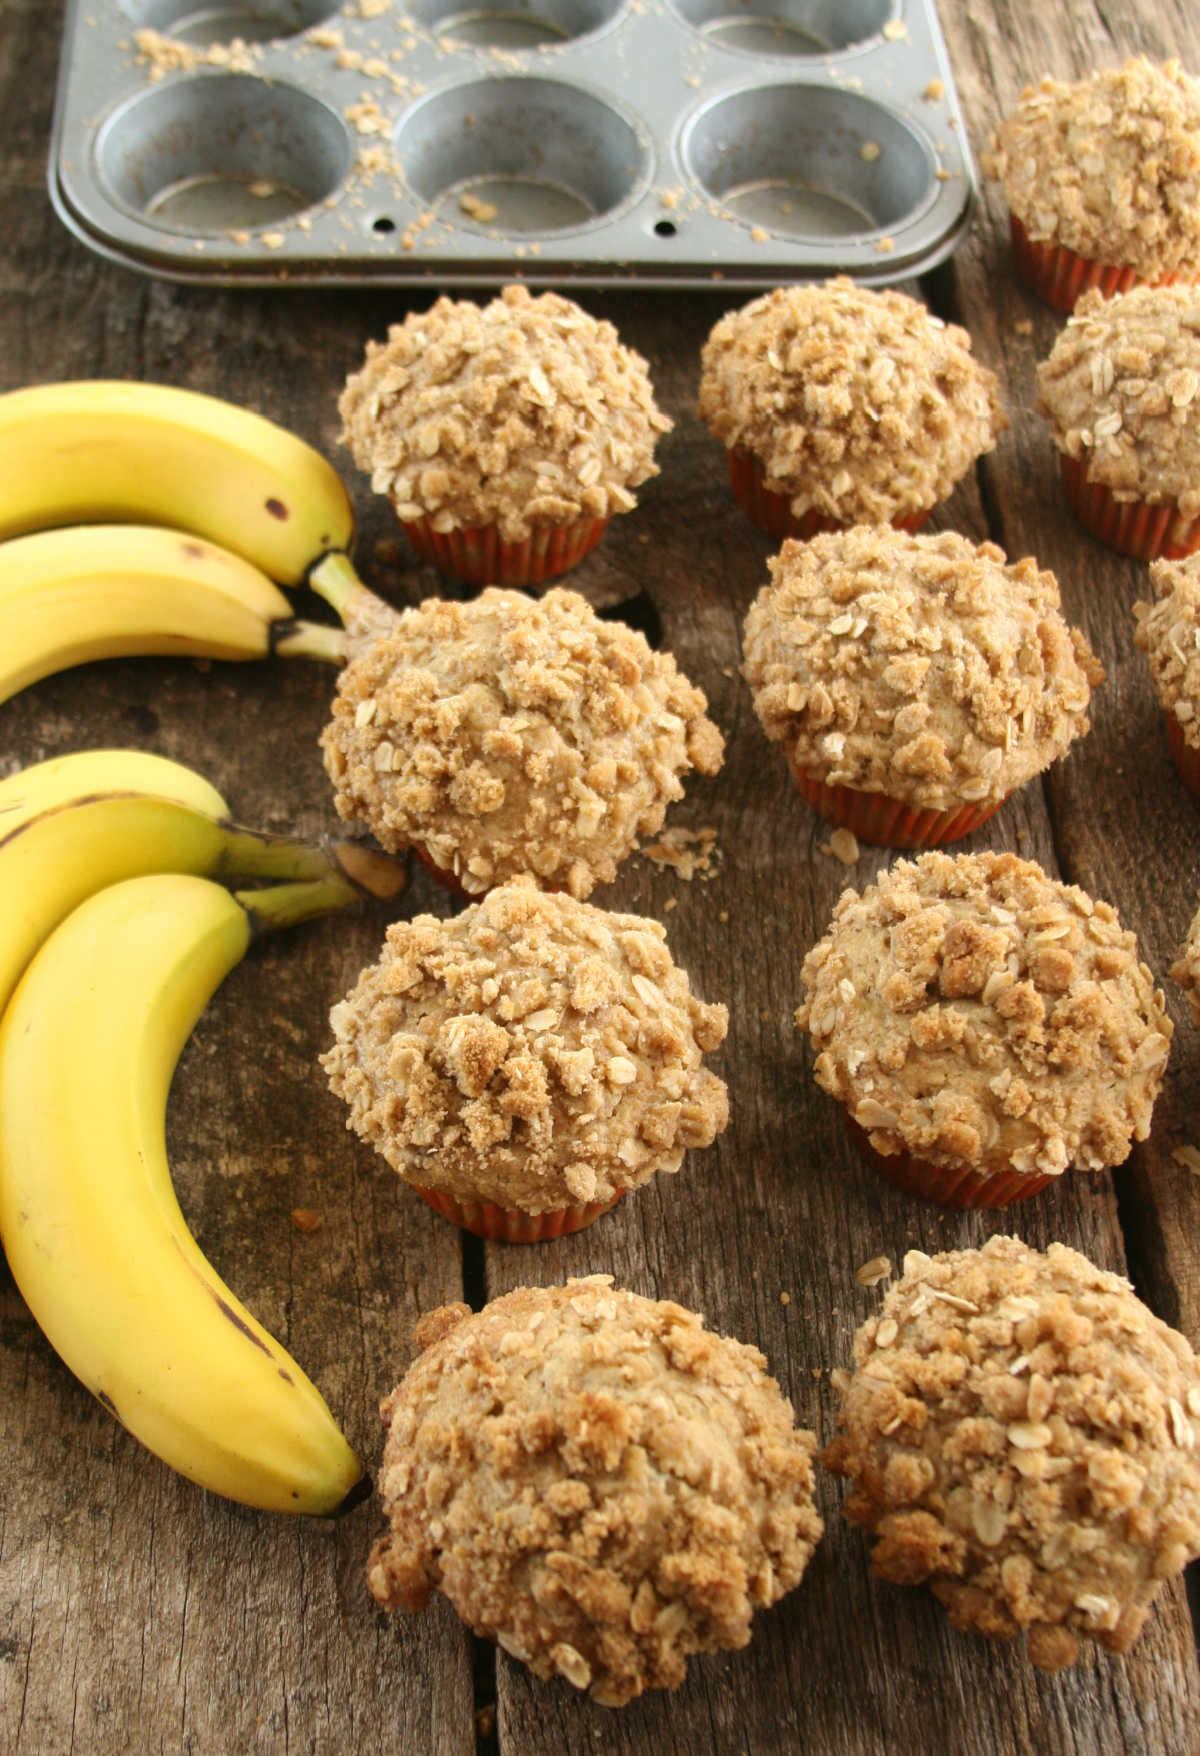 Banana muffins with oatmeal topping on reclaimed wood boards, ripe bananas.